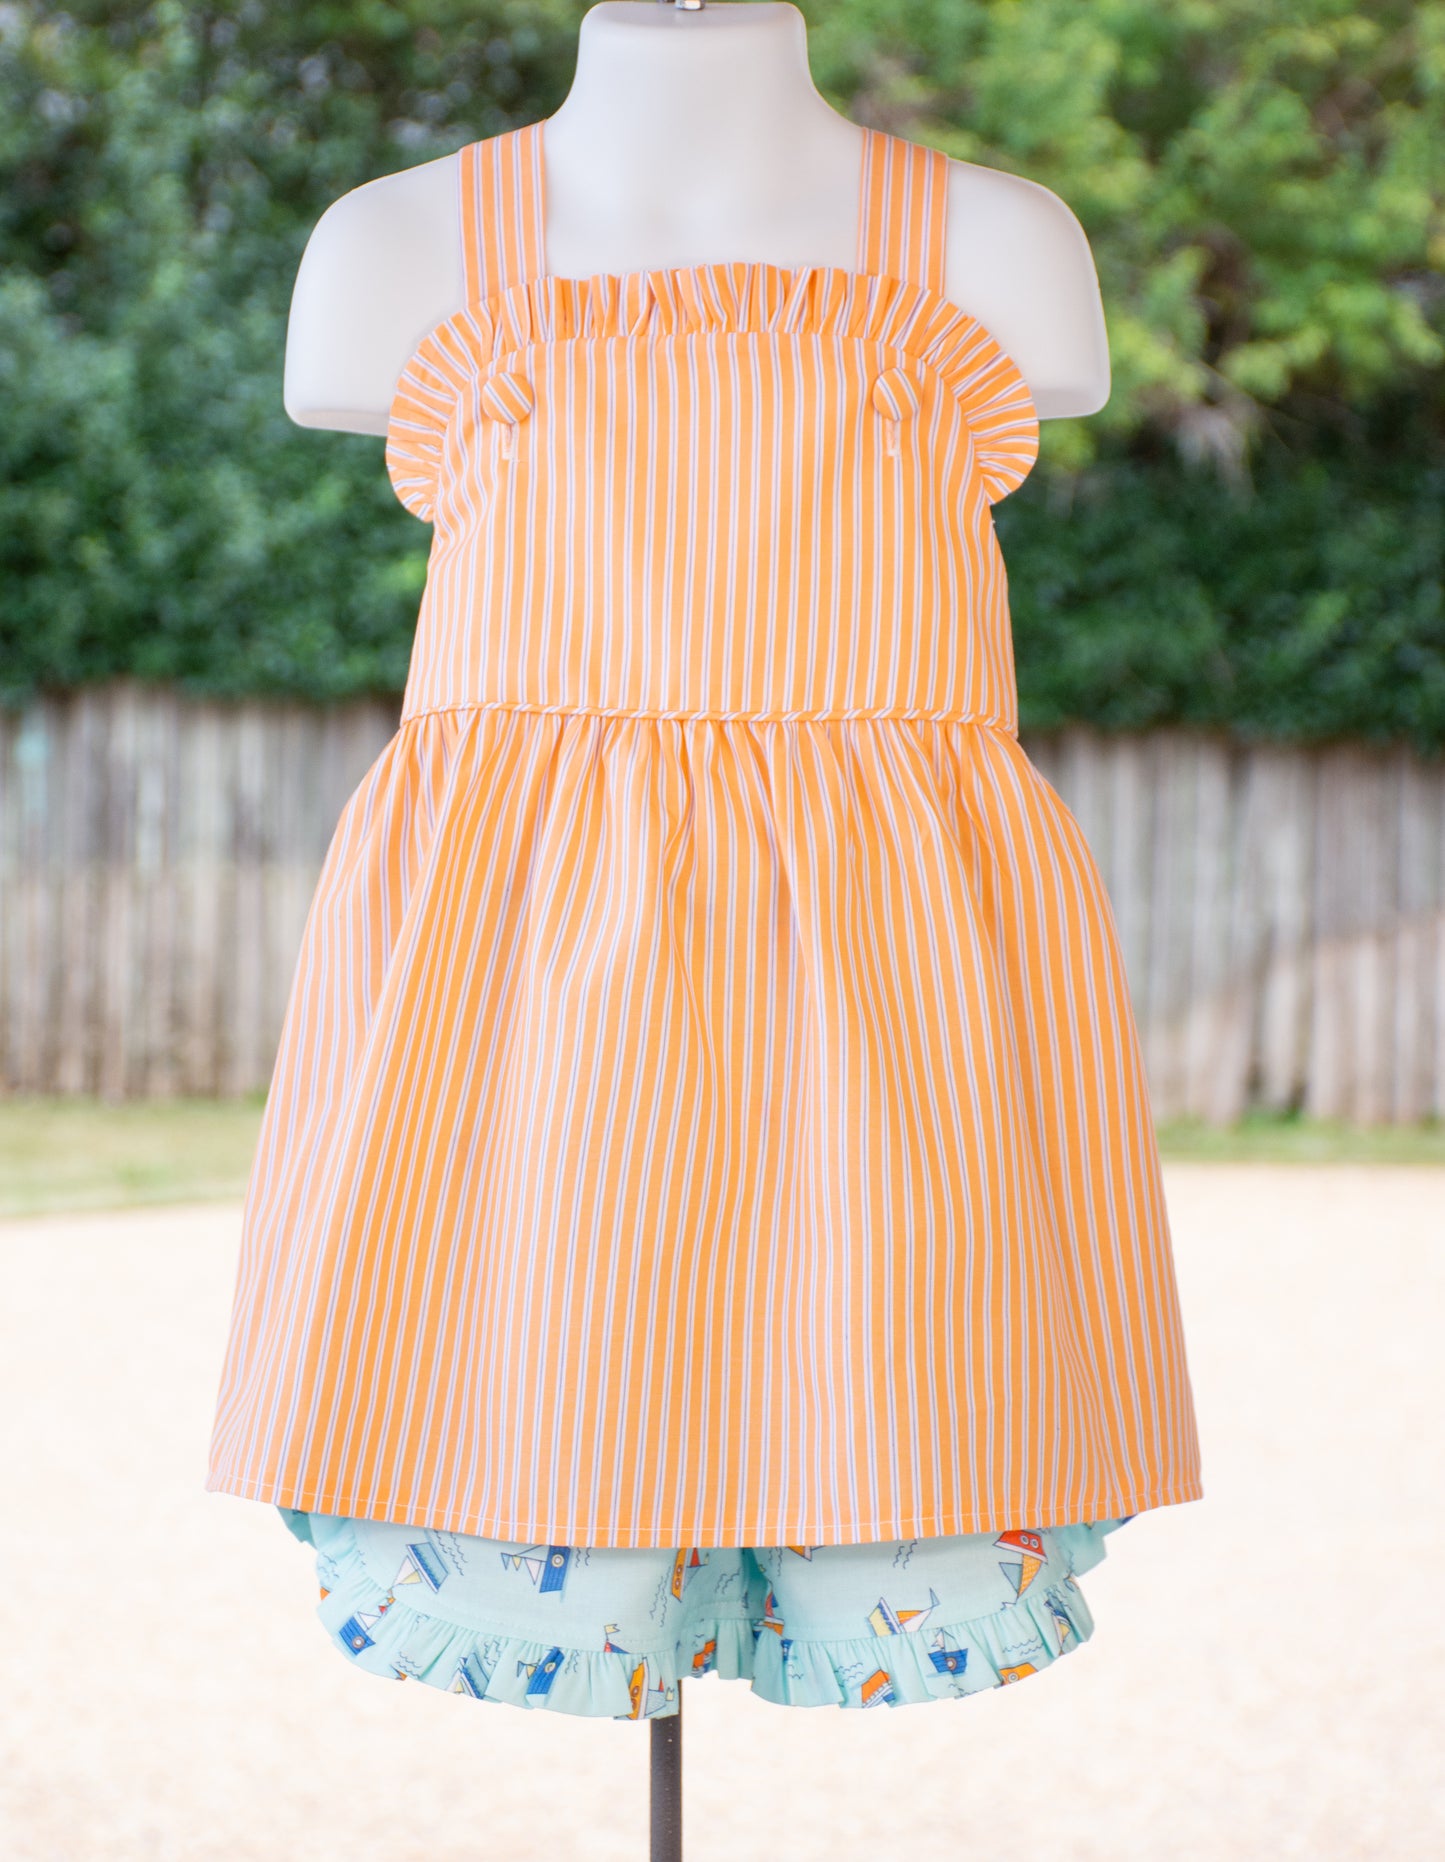 Orange stripes Laurie top + sailboat Alice shorts 5t